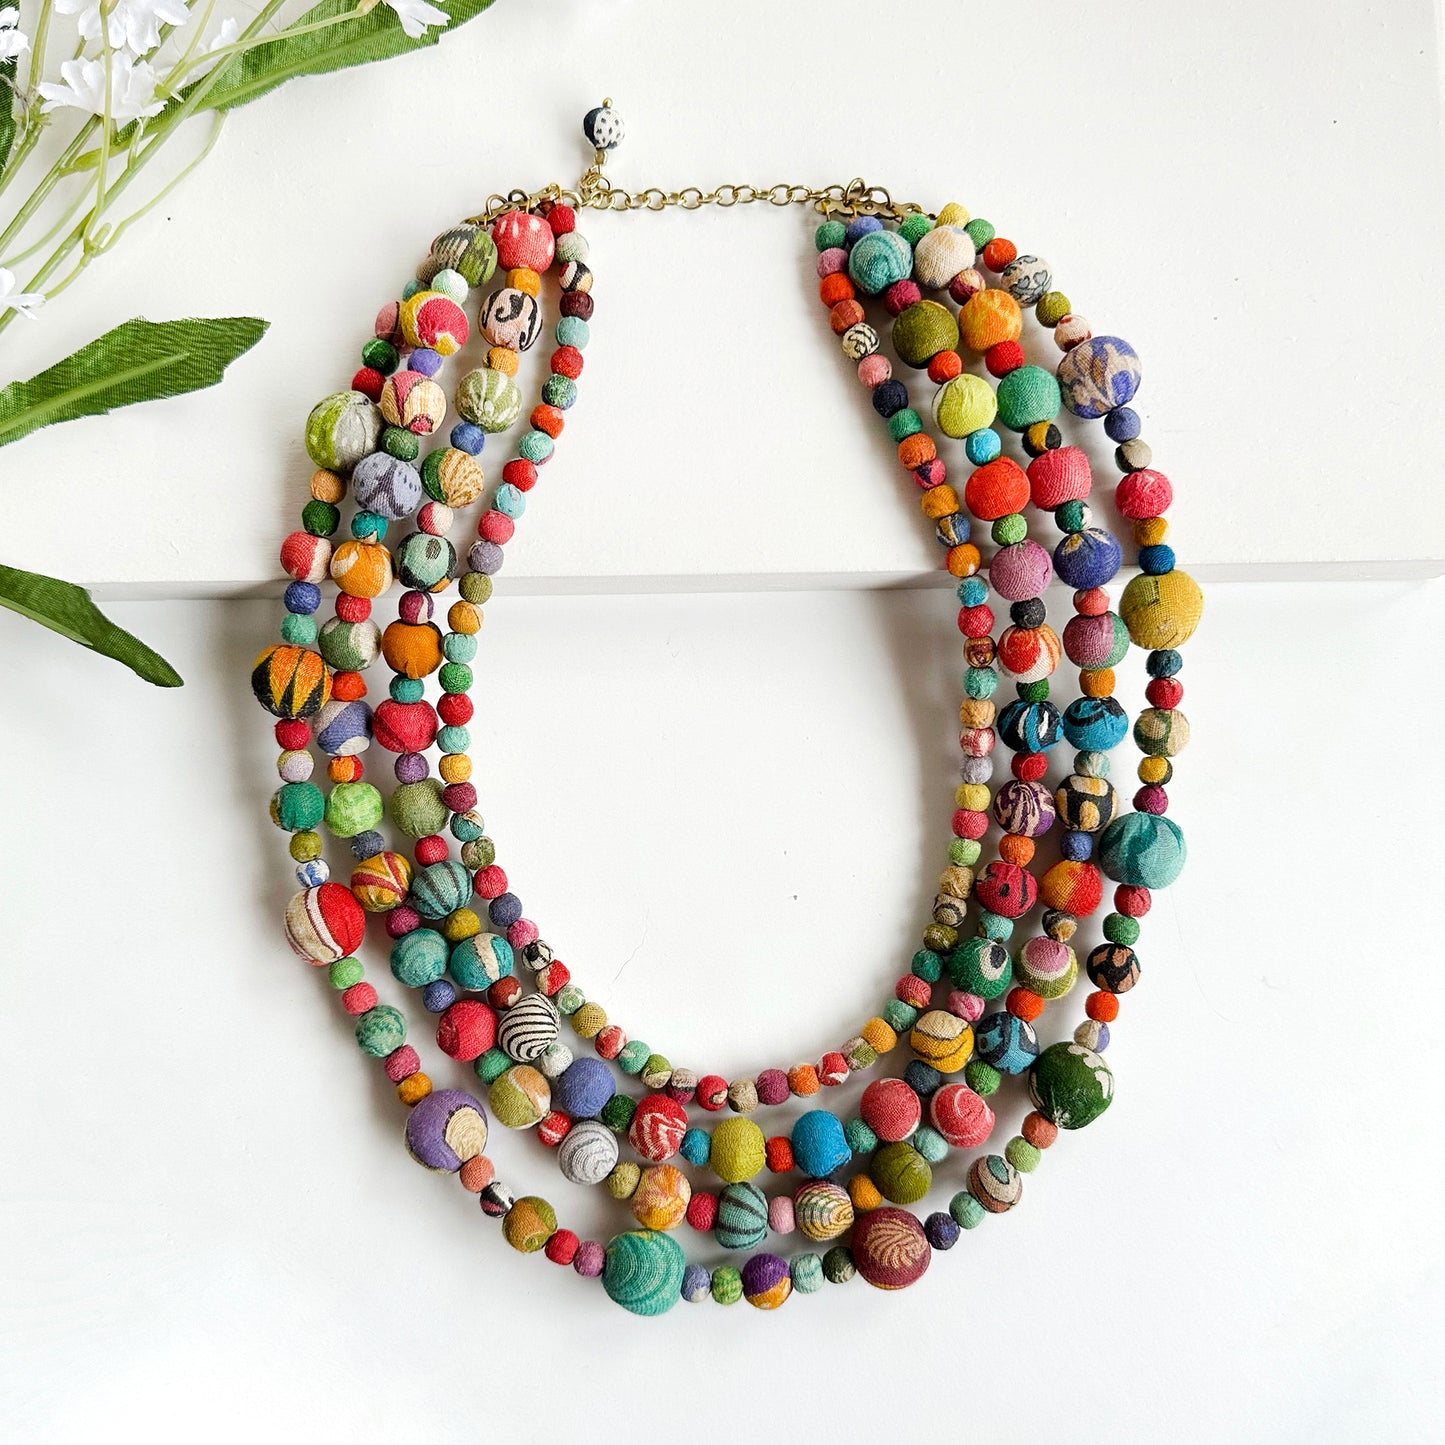 A colorful four-strand necklace features various alternating sized textile-wrapped beads.